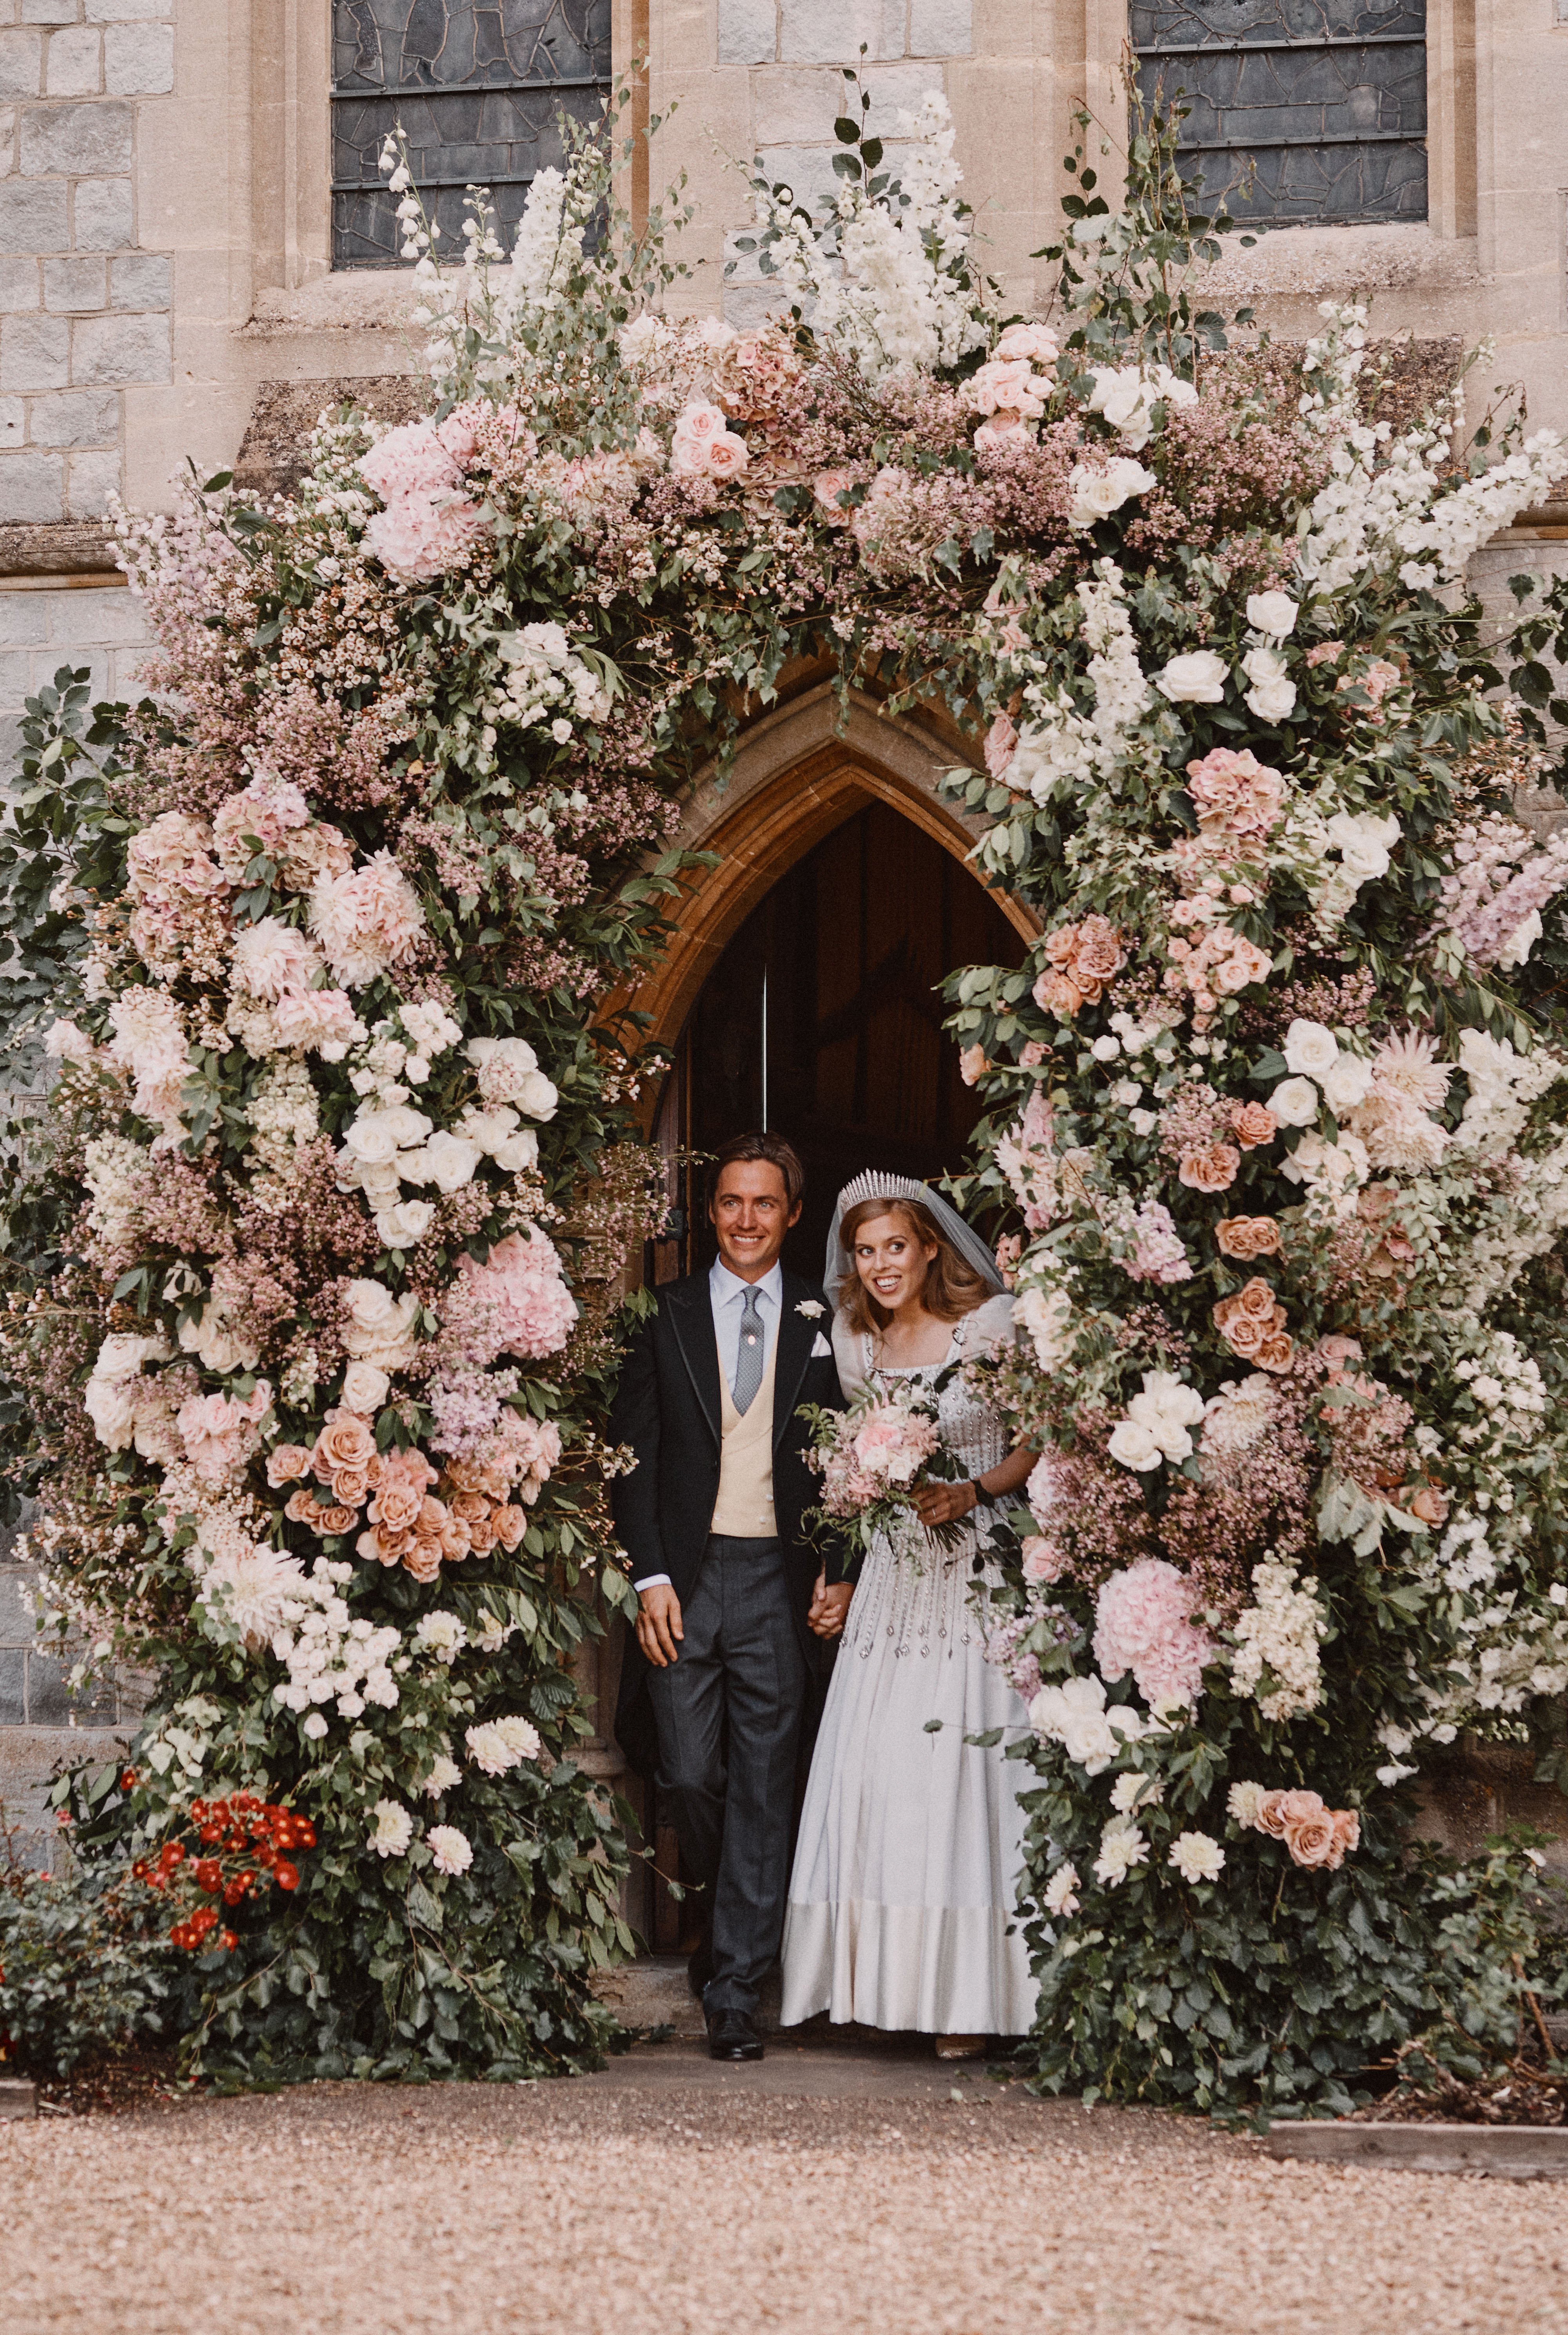 Princess Beatrice and Edoardo Mapelli Mozzi pictured leaving The Royal Chapel of All Saints at Royal Lodge, Windsor after their wedding on July 17, 2020 in Windsor, England. / Source: Getty Images